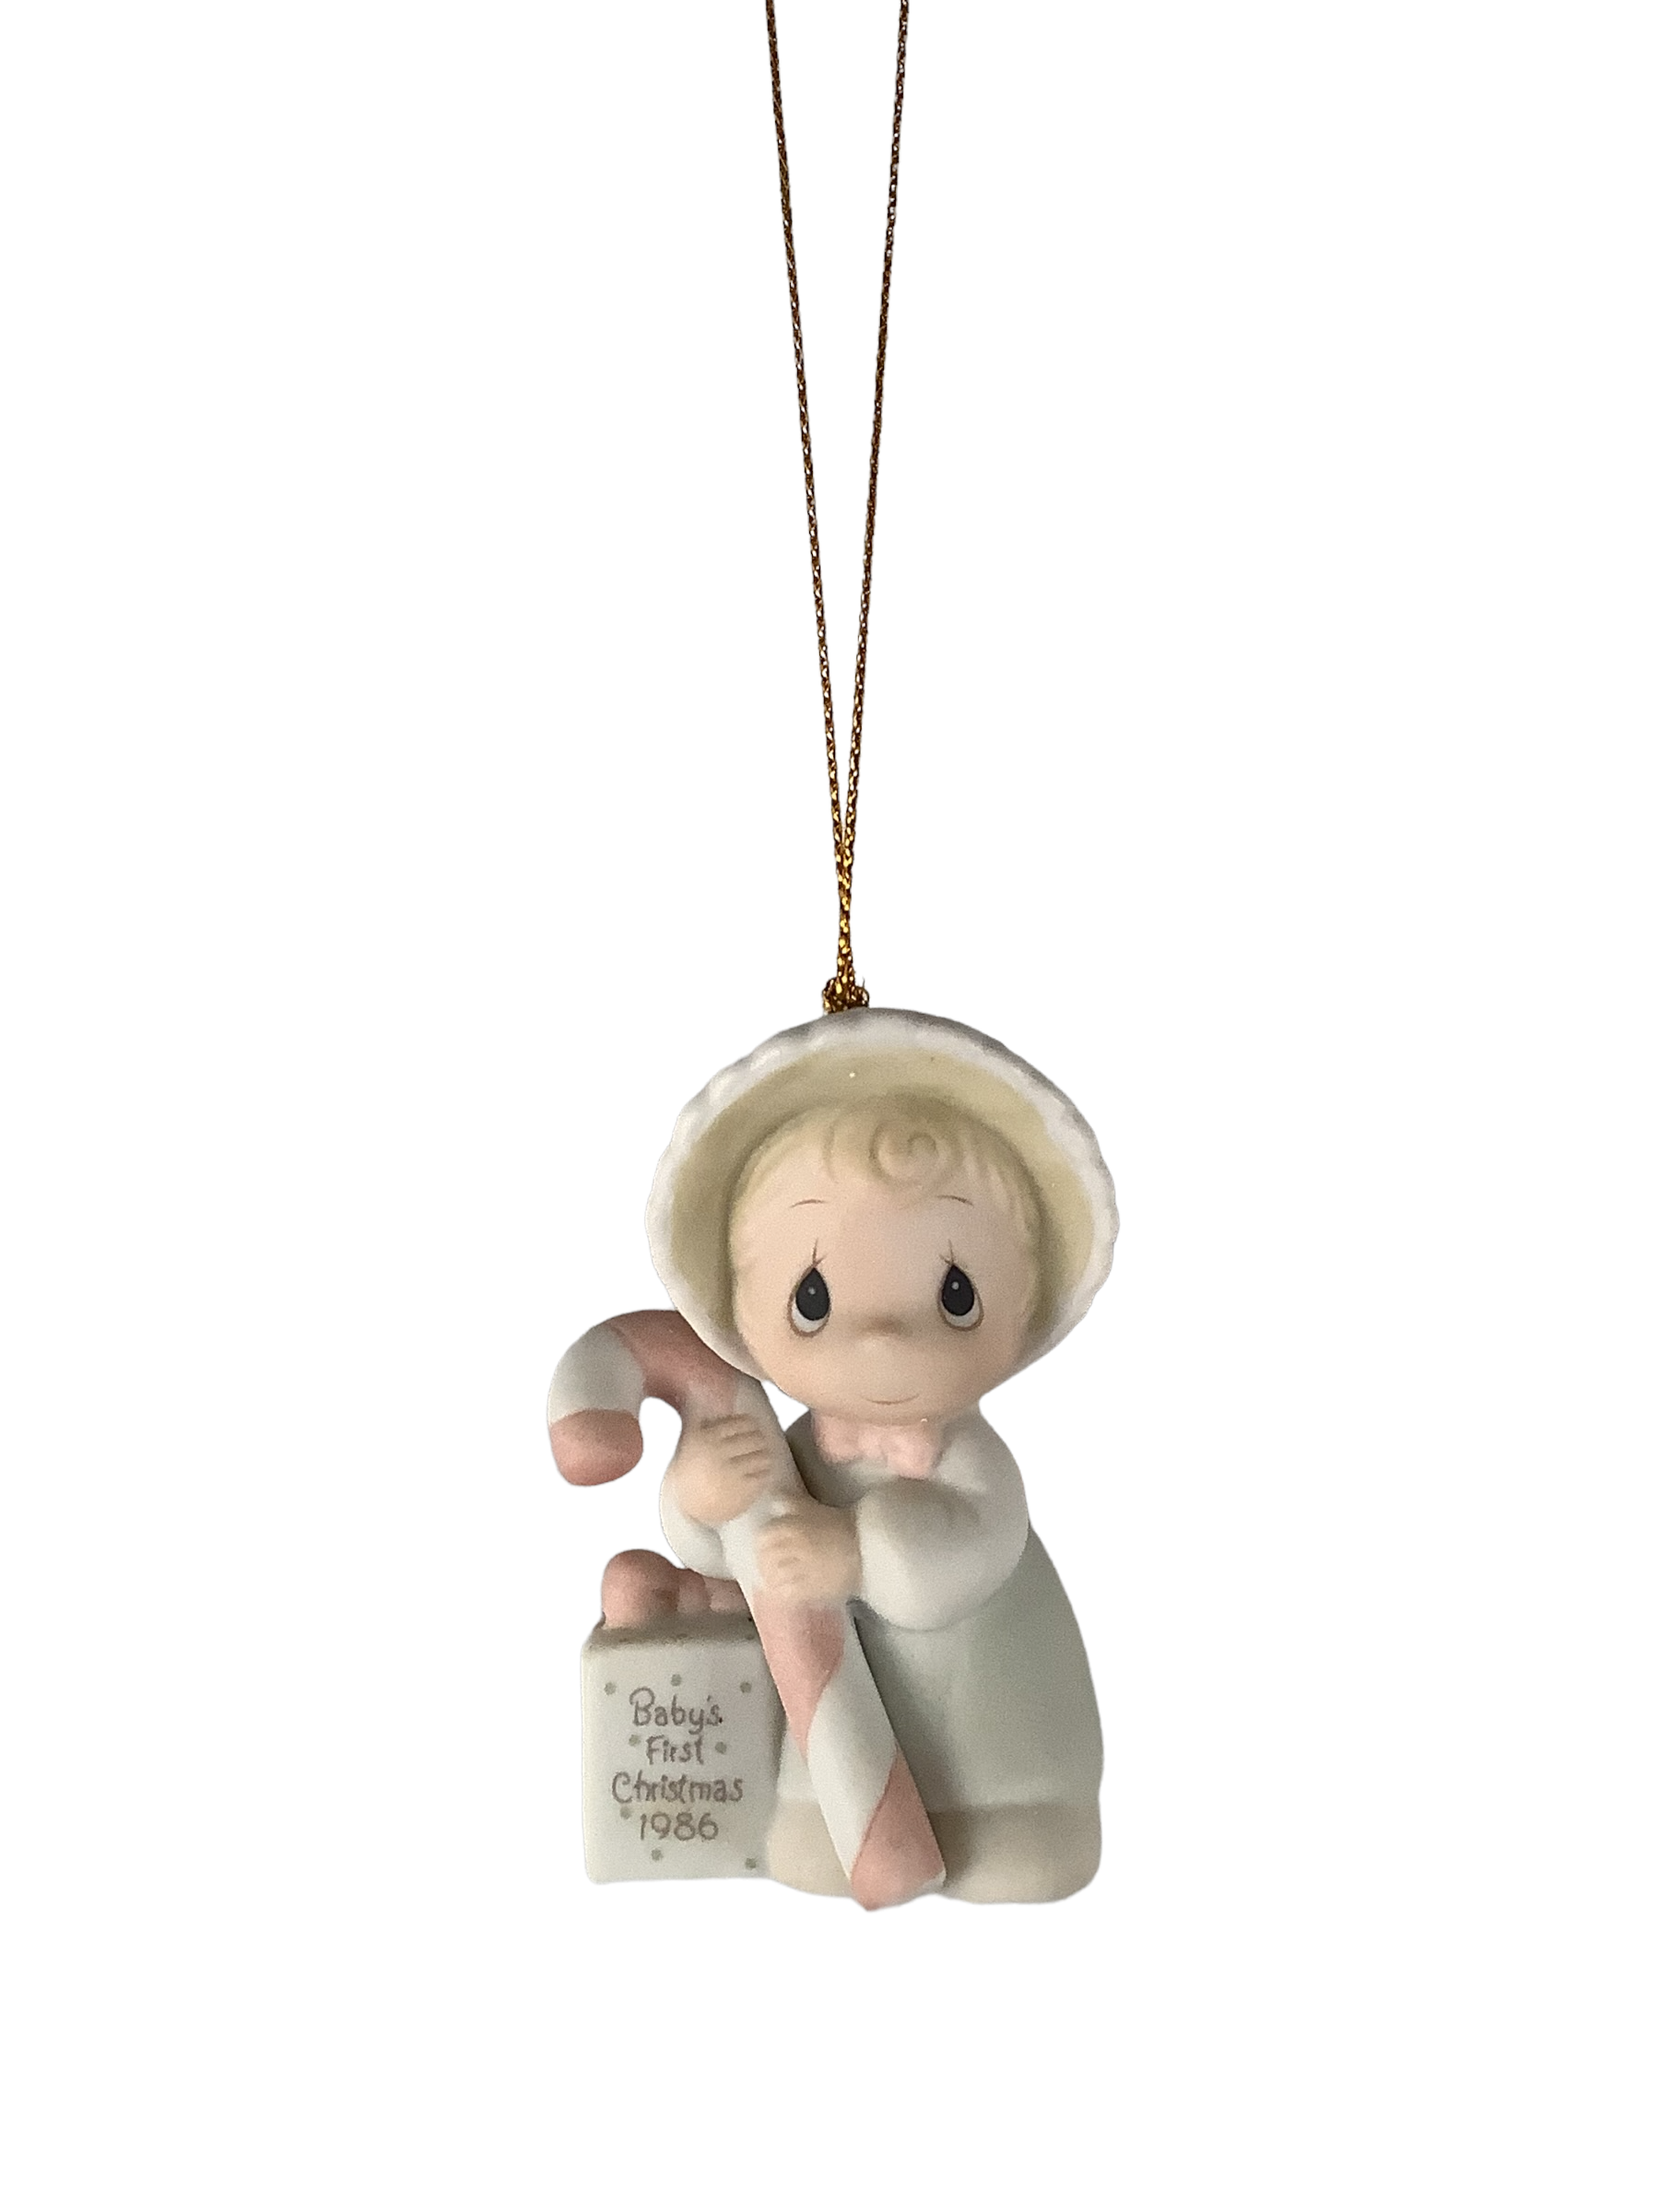 Baby's First Christmas 1986 (Girl) - Precious Moment Ornament